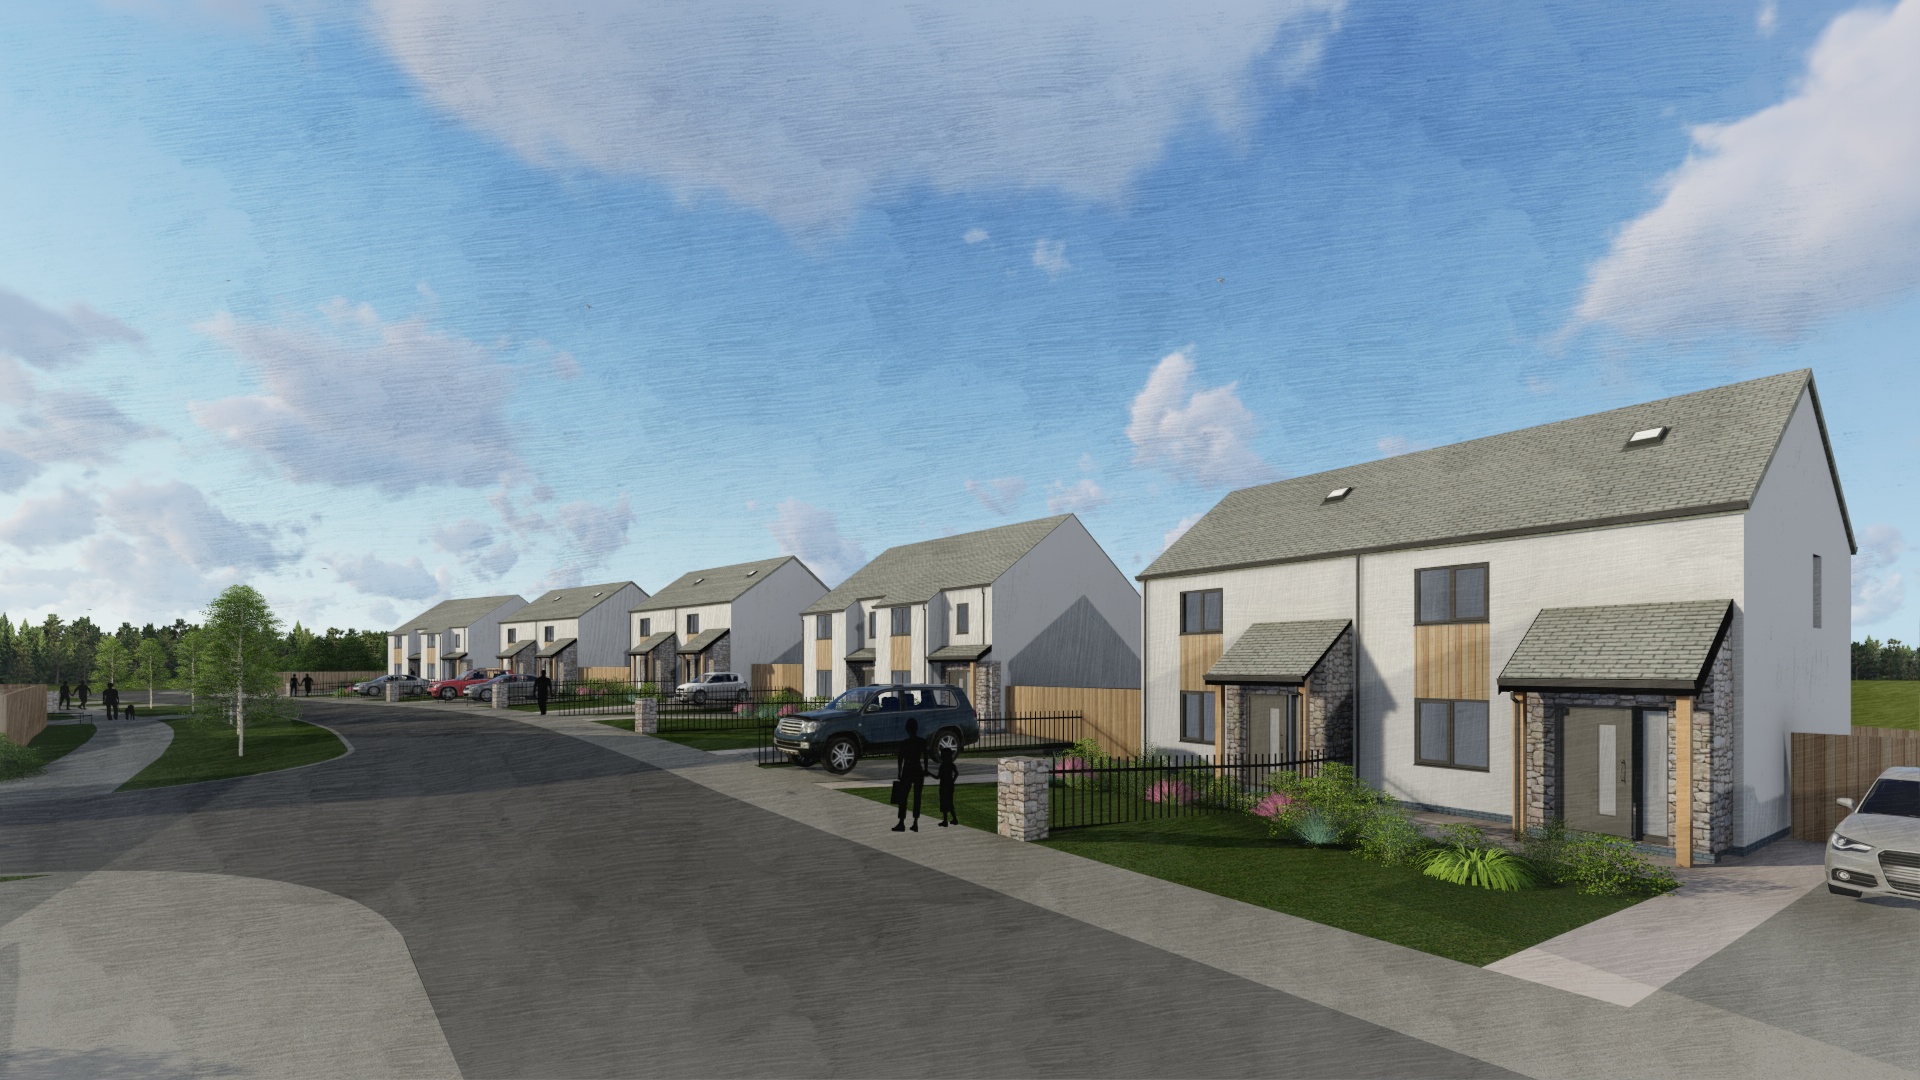 Work starts on new development of 23 affordable homes on Anglesey